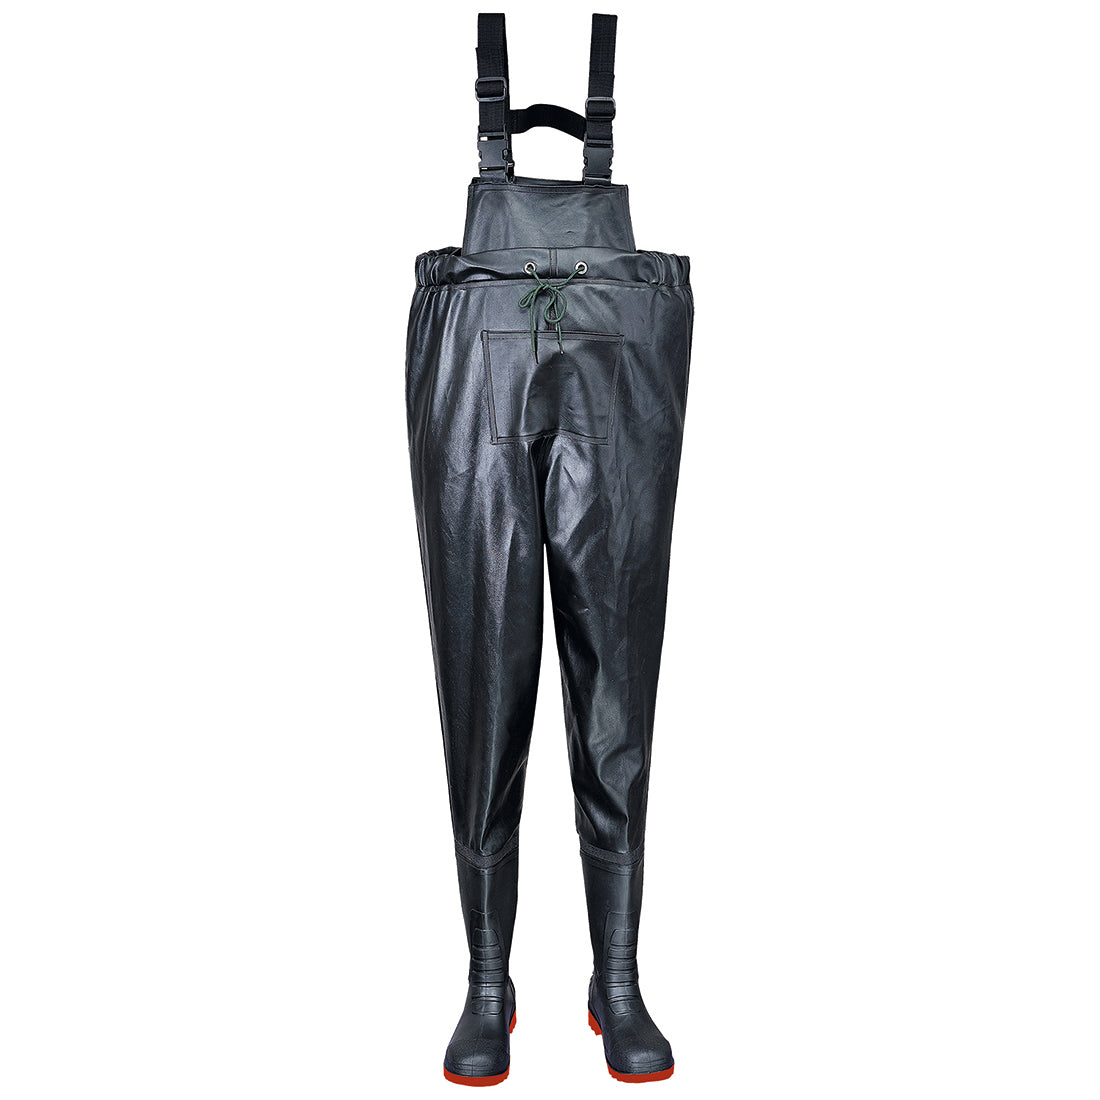  FW74 - Safety Chest Wader S5 Black 